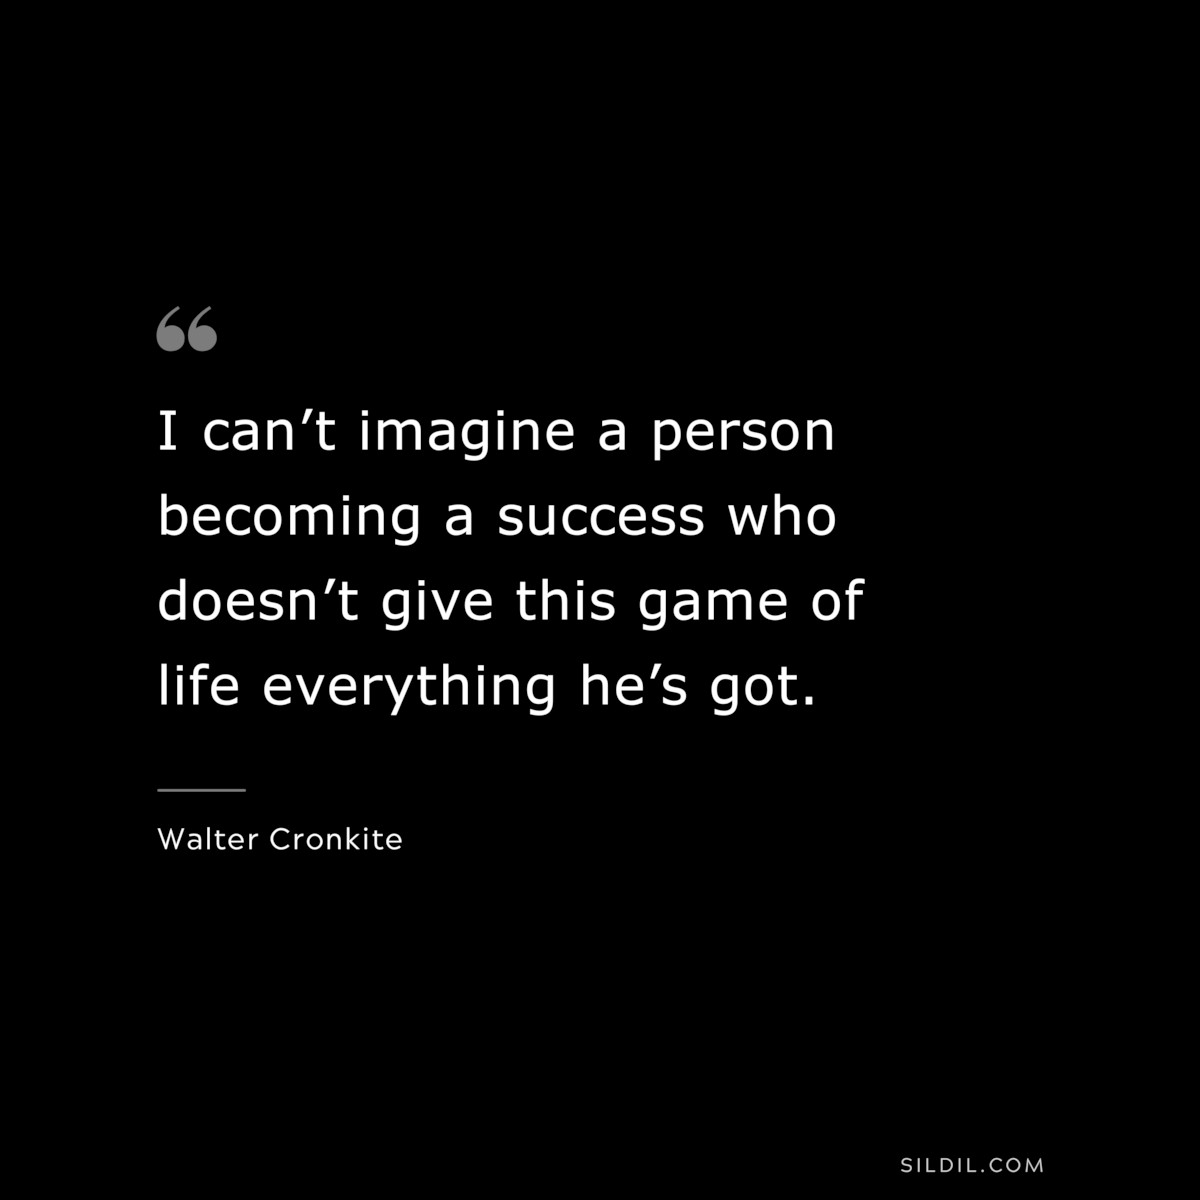 I can’t imagine a person becoming a success who doesn’t give this game of life everything he’s got. ― Walter Cronkite